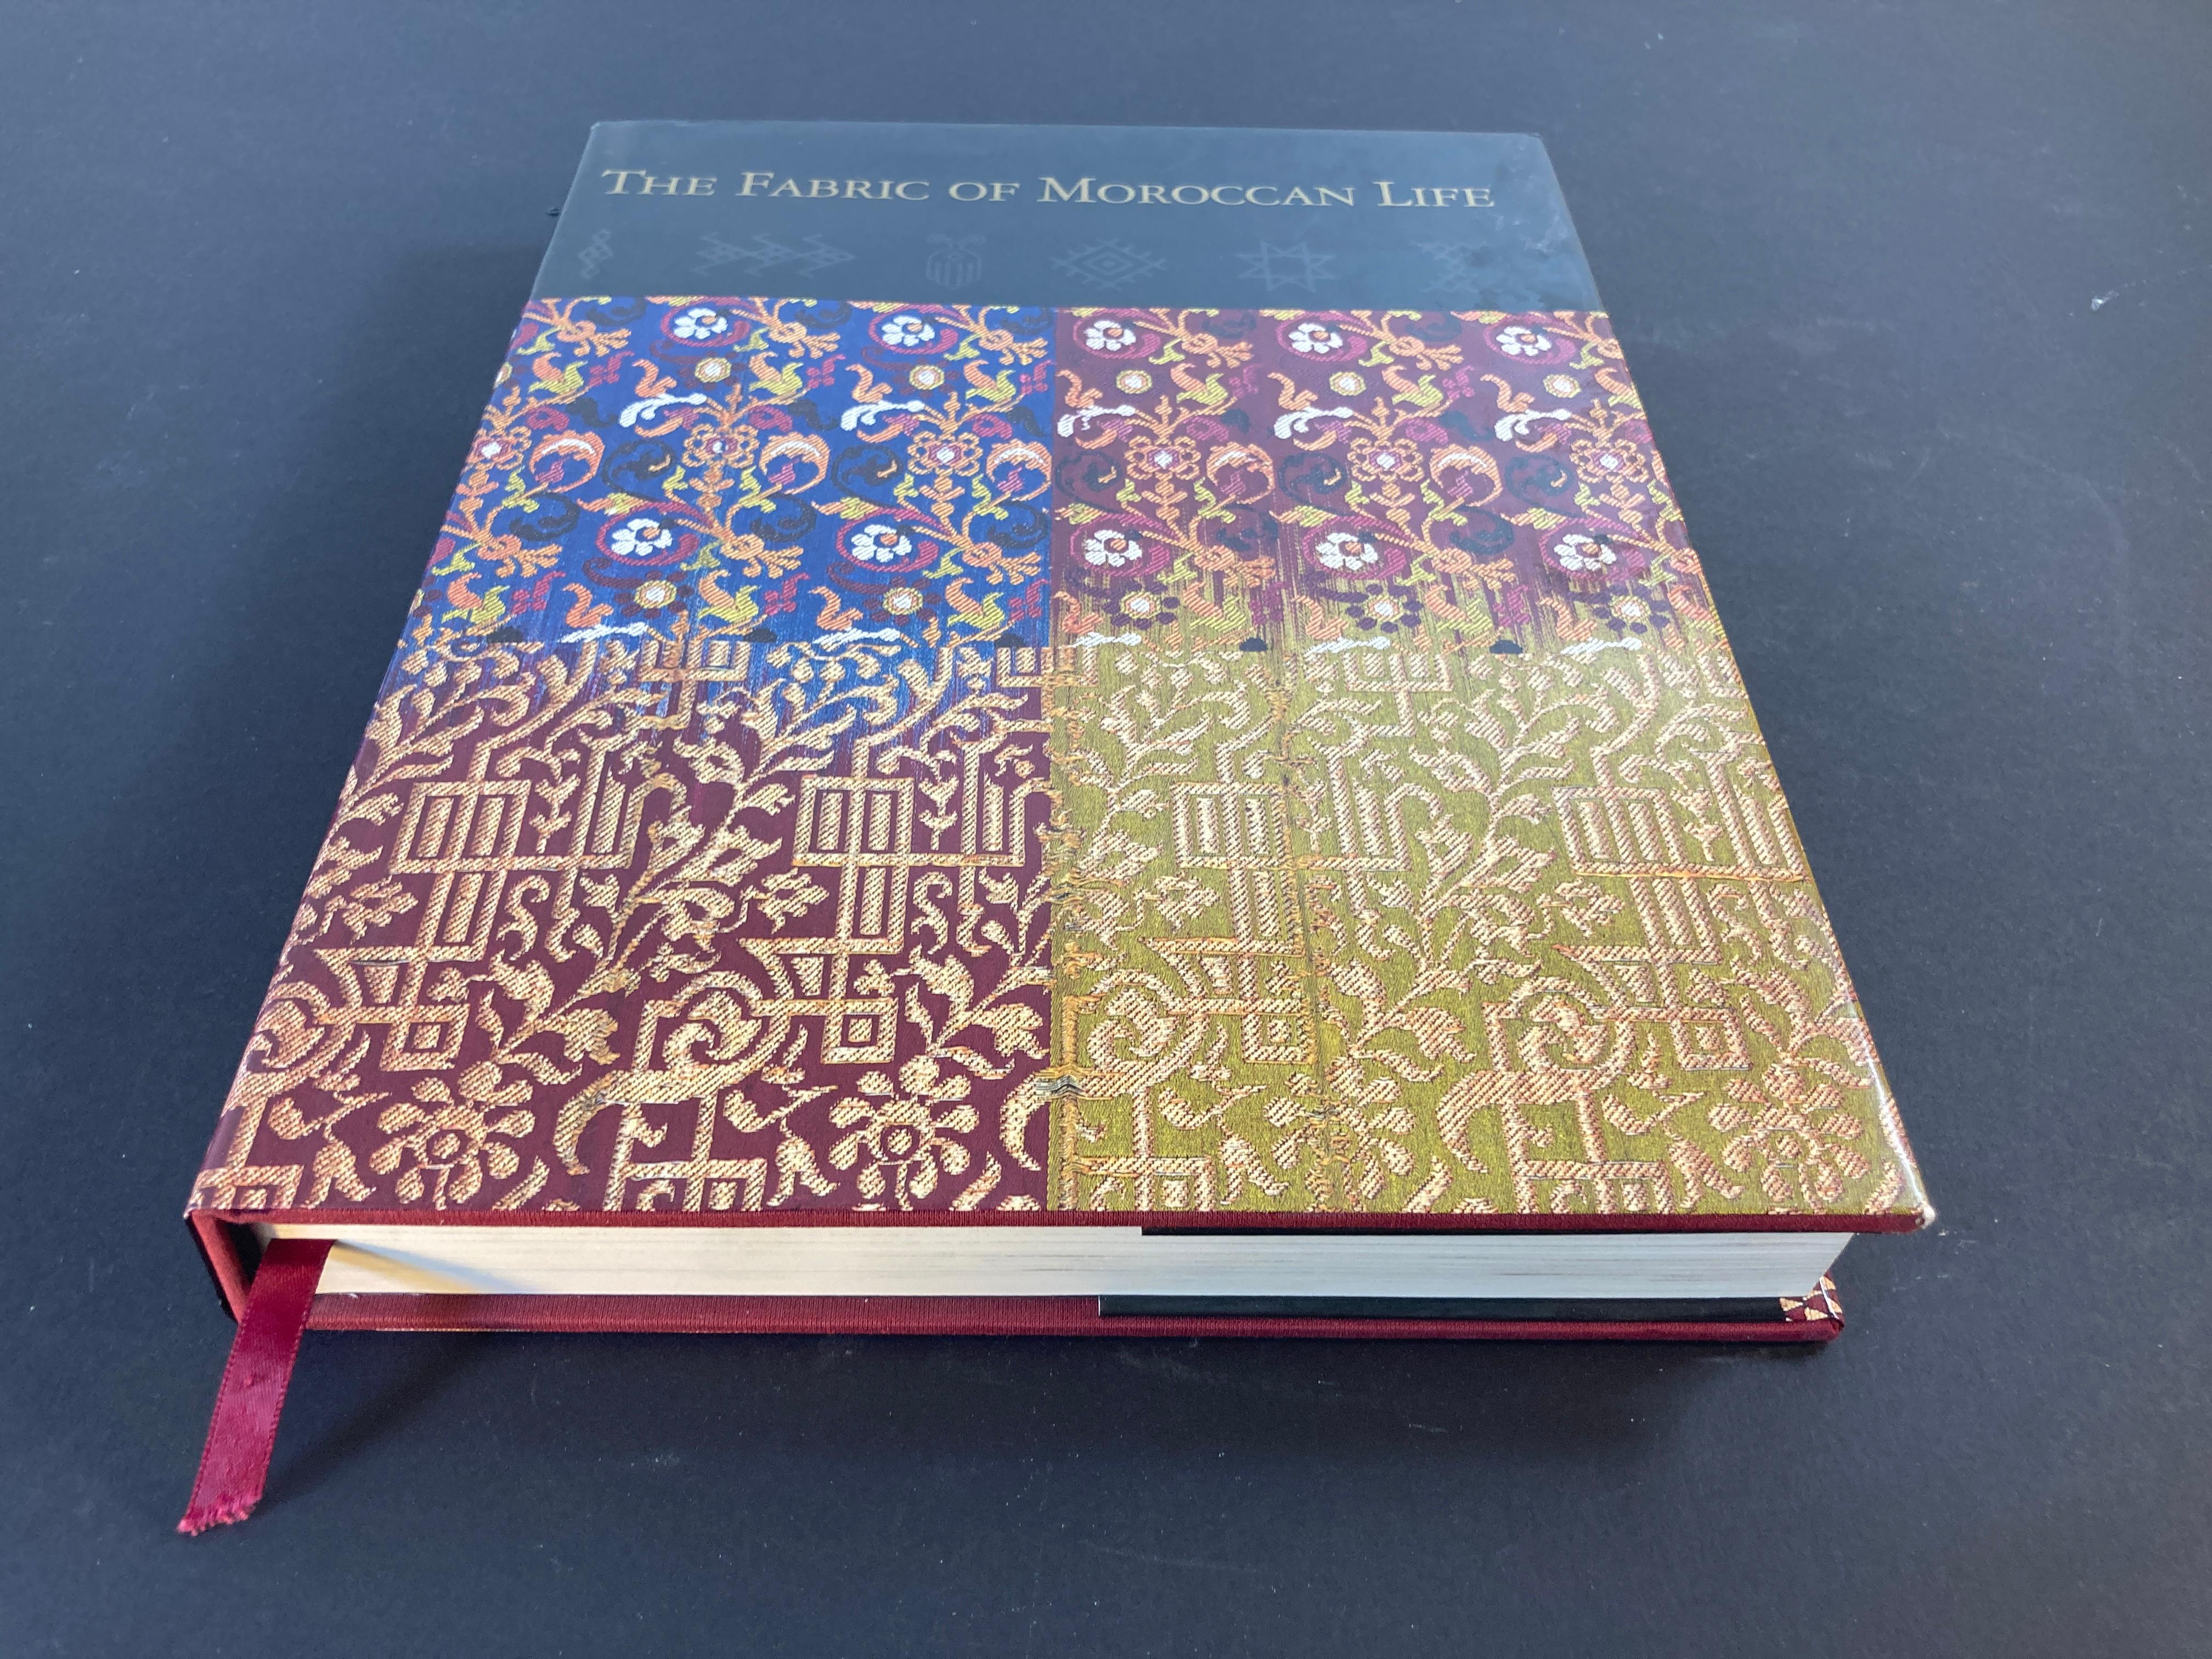 Folk Art The Fabric of Moroccan Life Book by Ivo Grammet and Niloo Imami Paydar For Sale